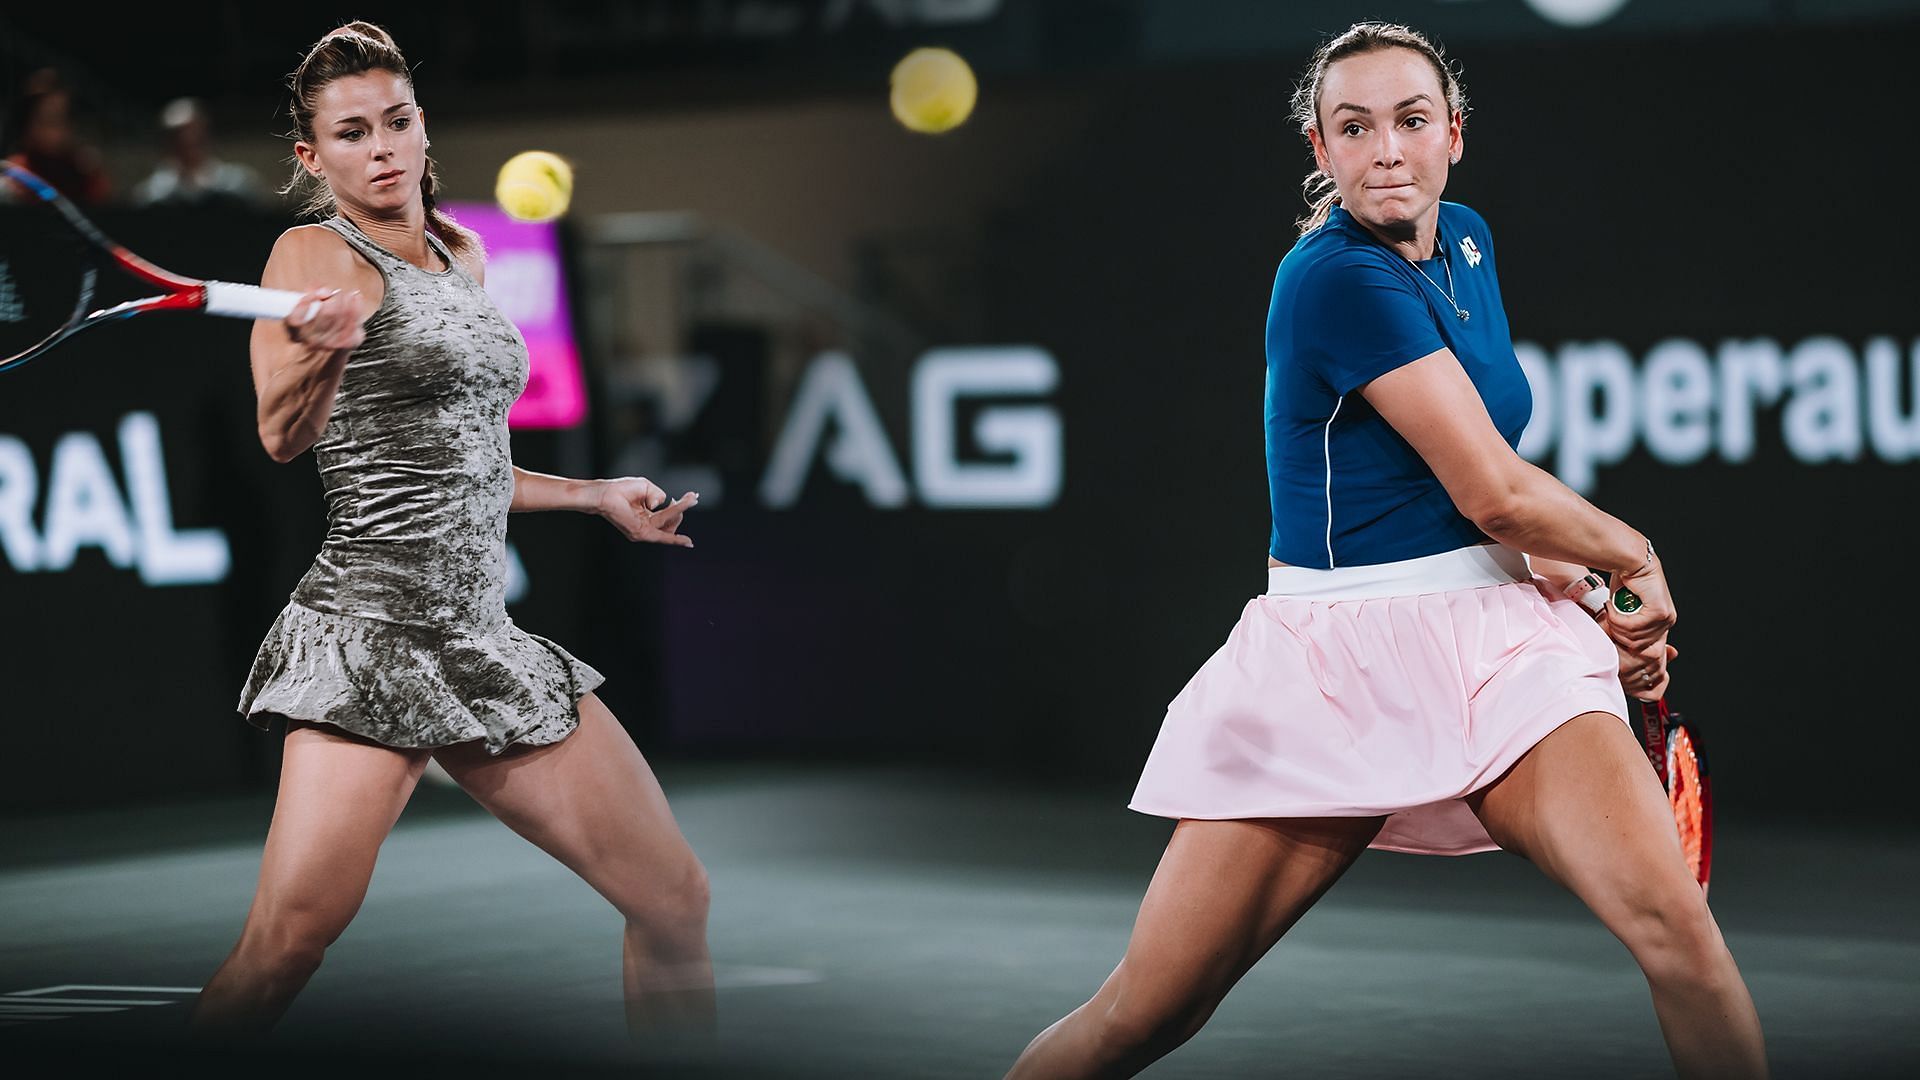 Vekic (left) and Georgi will be in action on Thursday in Linz.